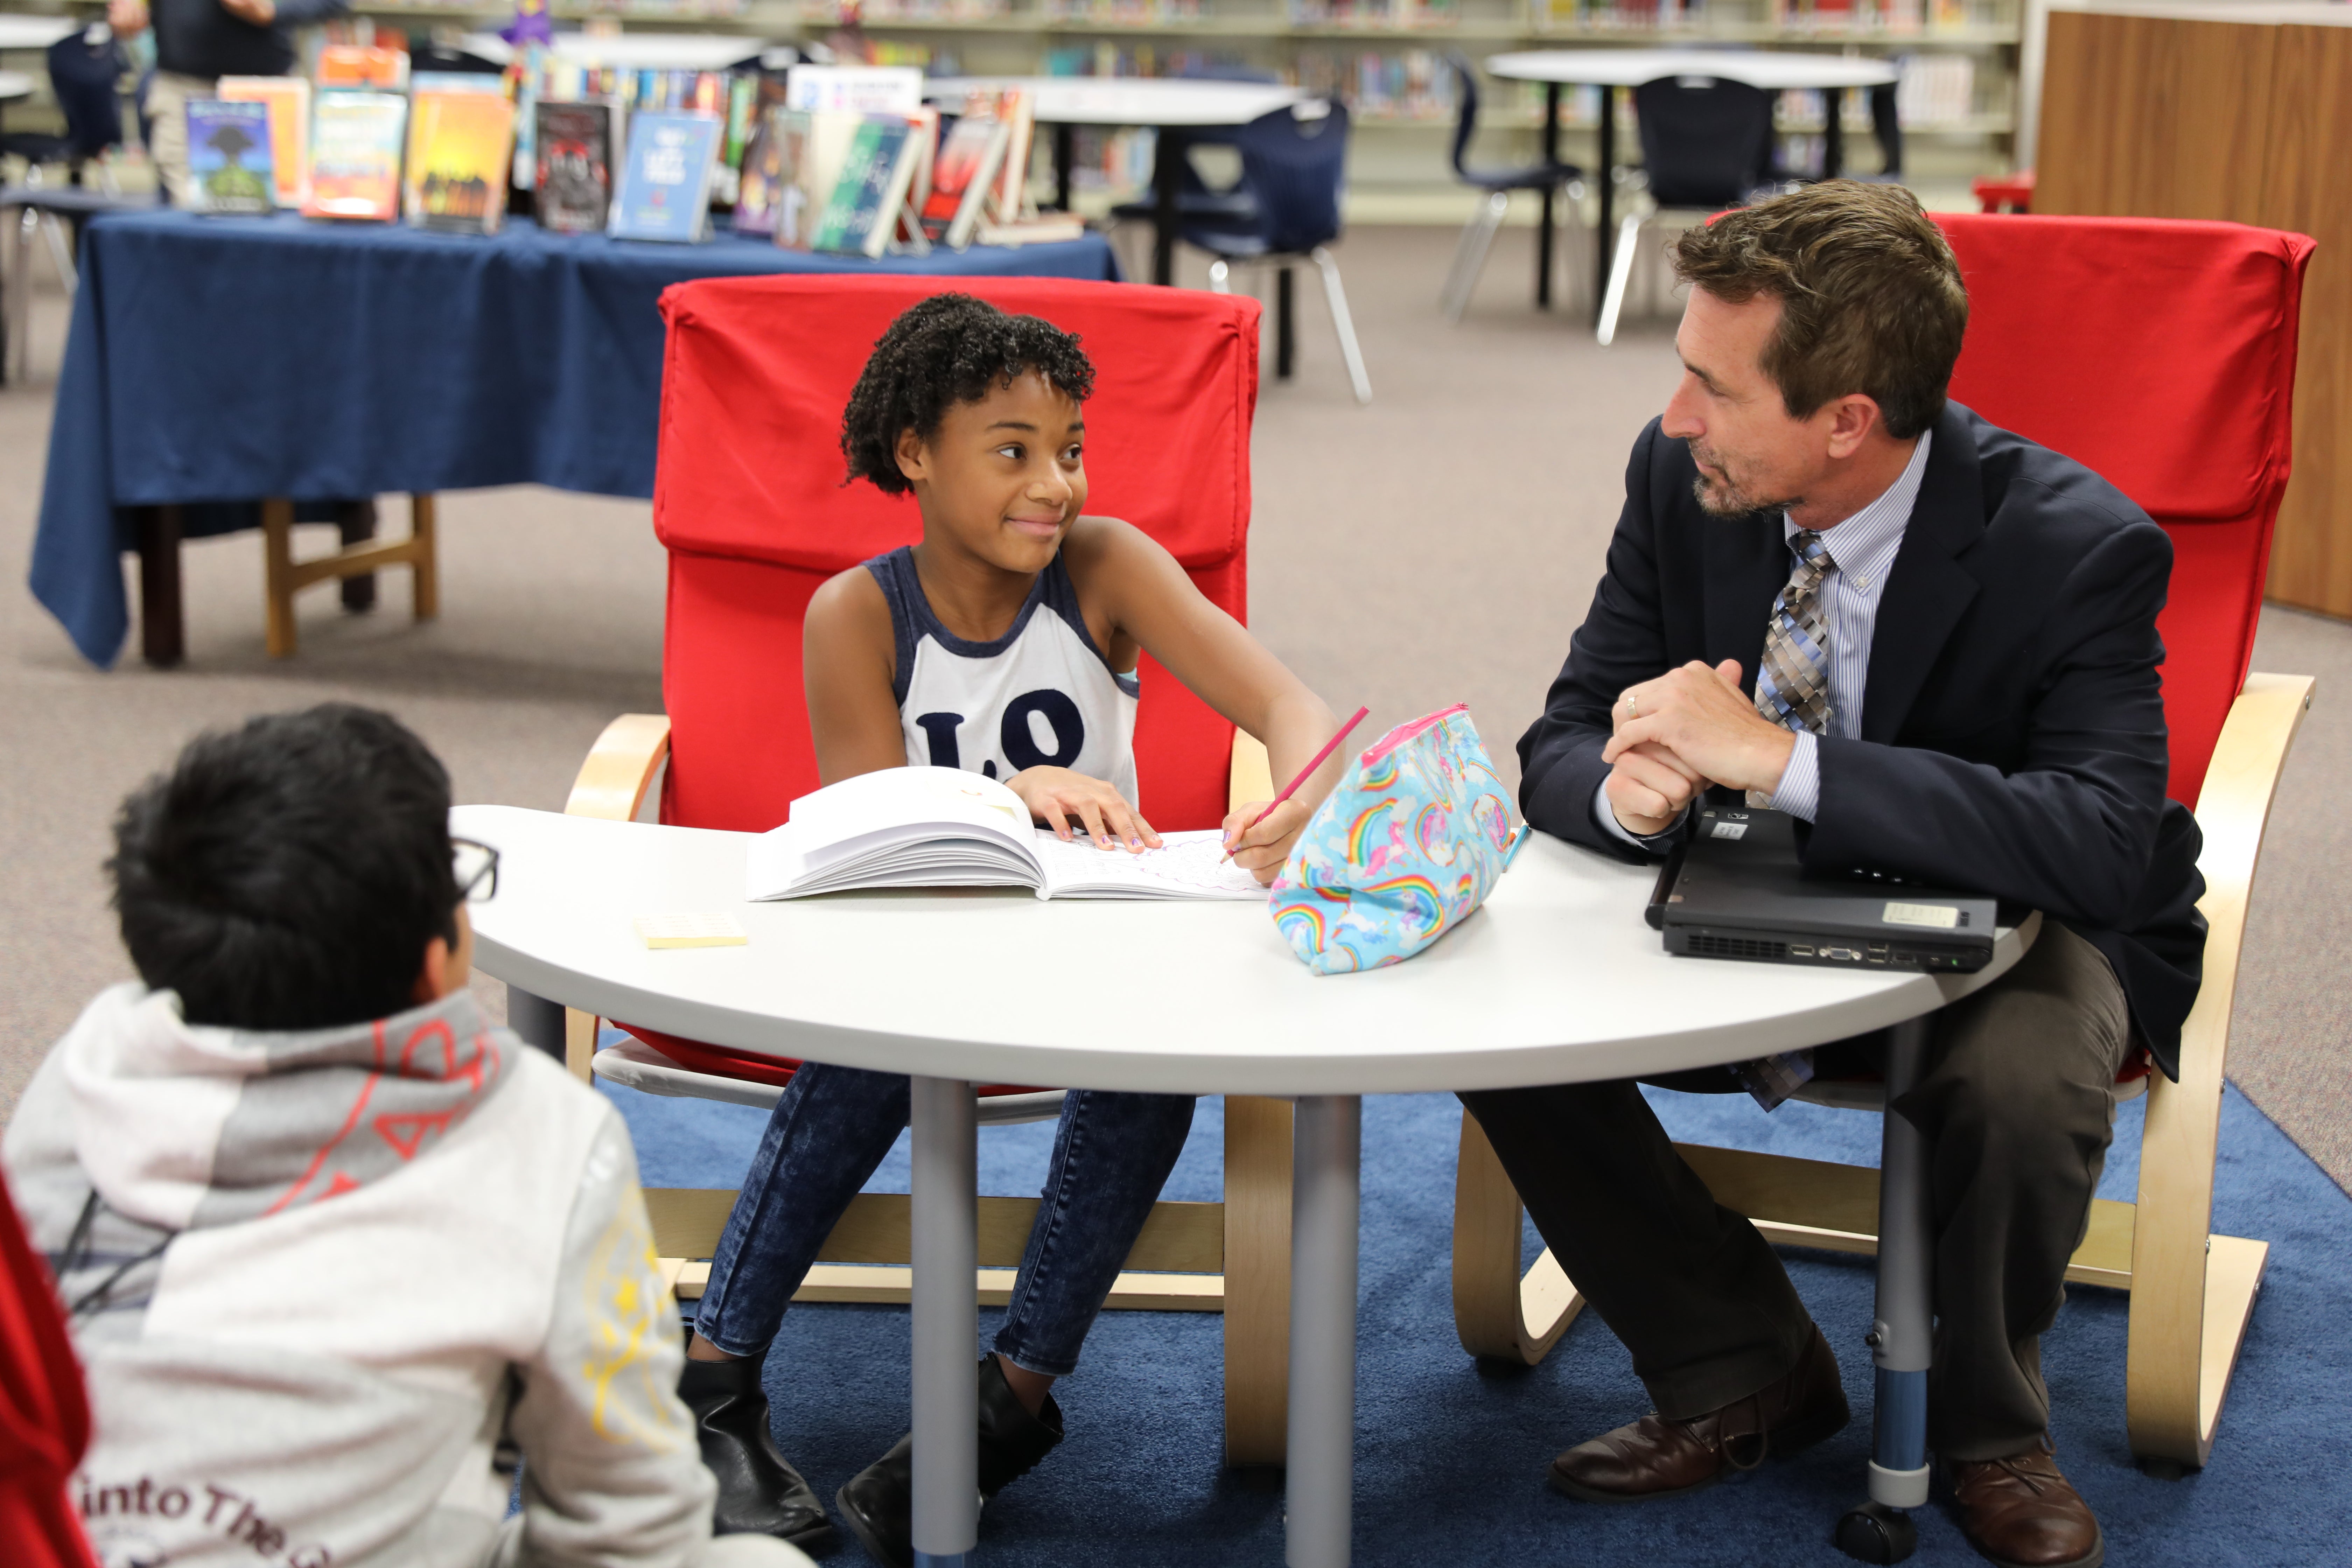 A school principal chats with two students in the library.